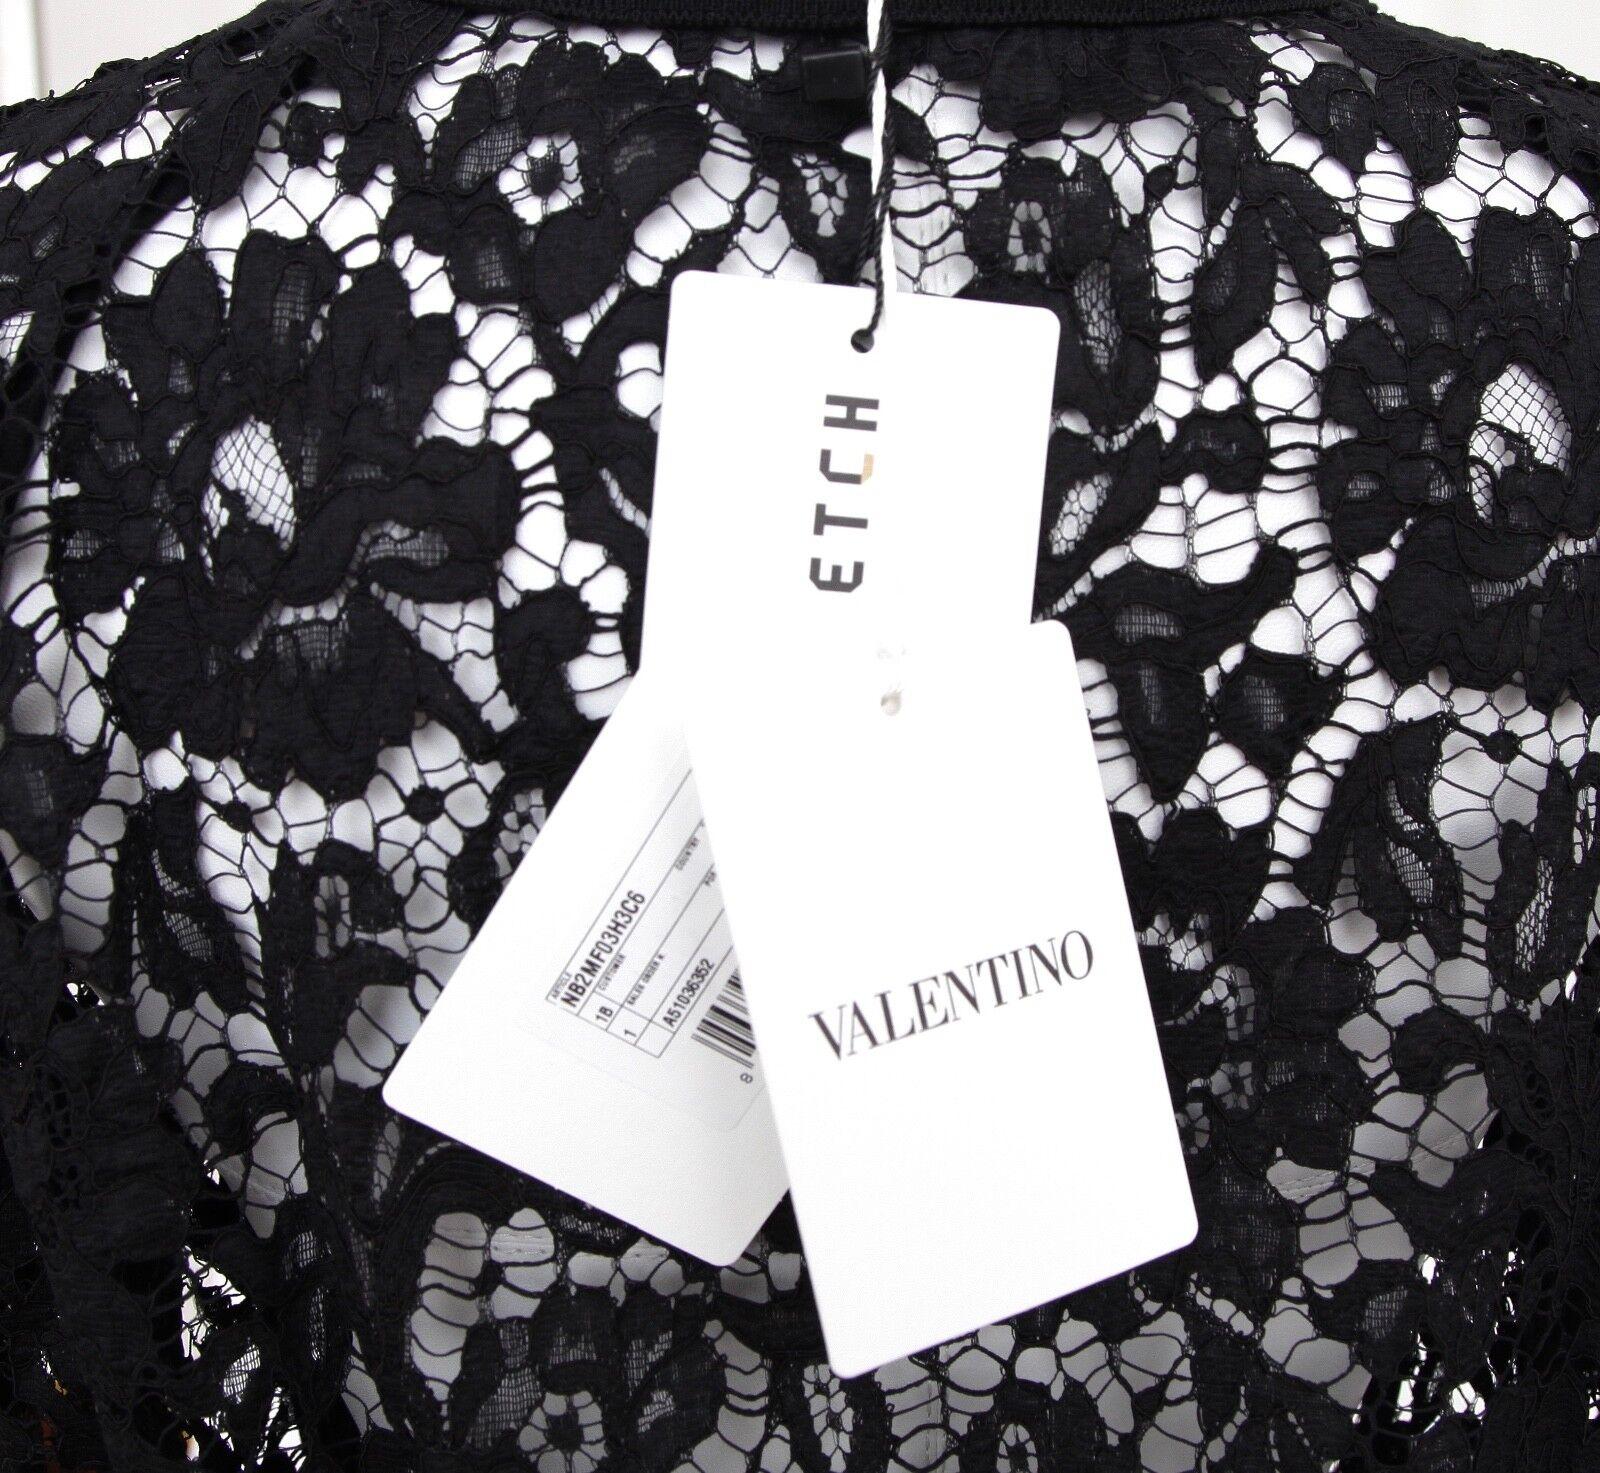 VALENTINO Floral Lace Blouse Top Shirt Long Sleeve Black White Sz S BNWT For Sale 4